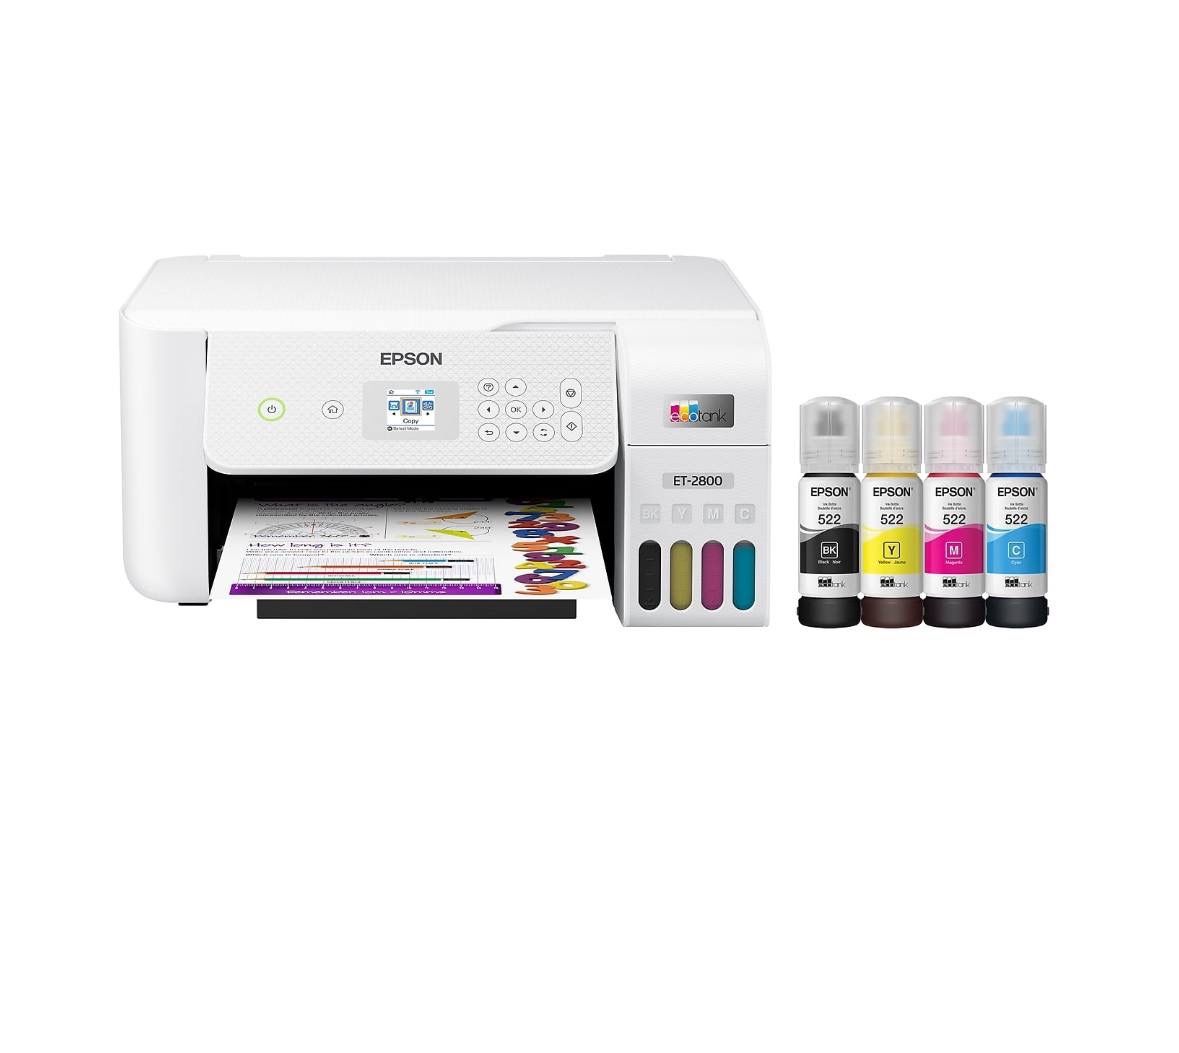 Epson EcoTank ET-2800 Wireless Color All-in-One Cartridge-Free Supertank Printer with Scan and Copy ? The Ideal Basic Home Printer - White. Opened box